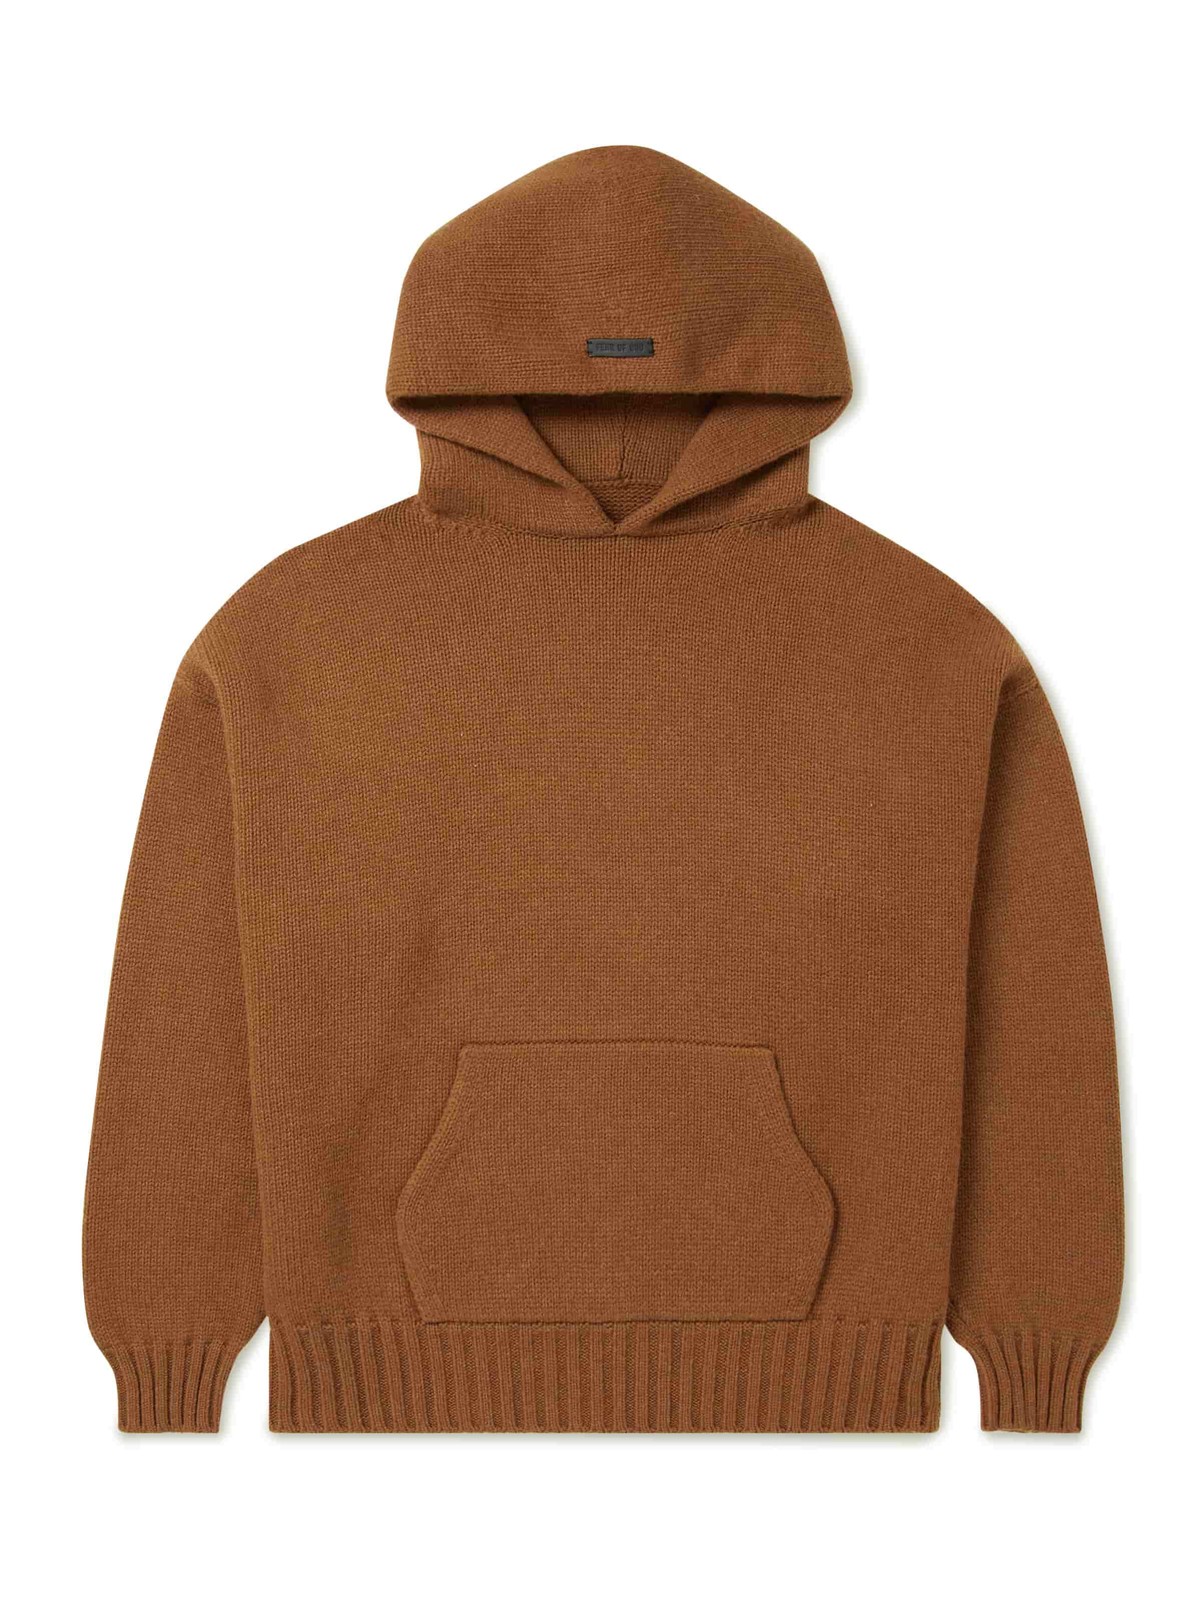 MR PORTER x Fear of God - Wool and Cashmere-Blend Hoodie